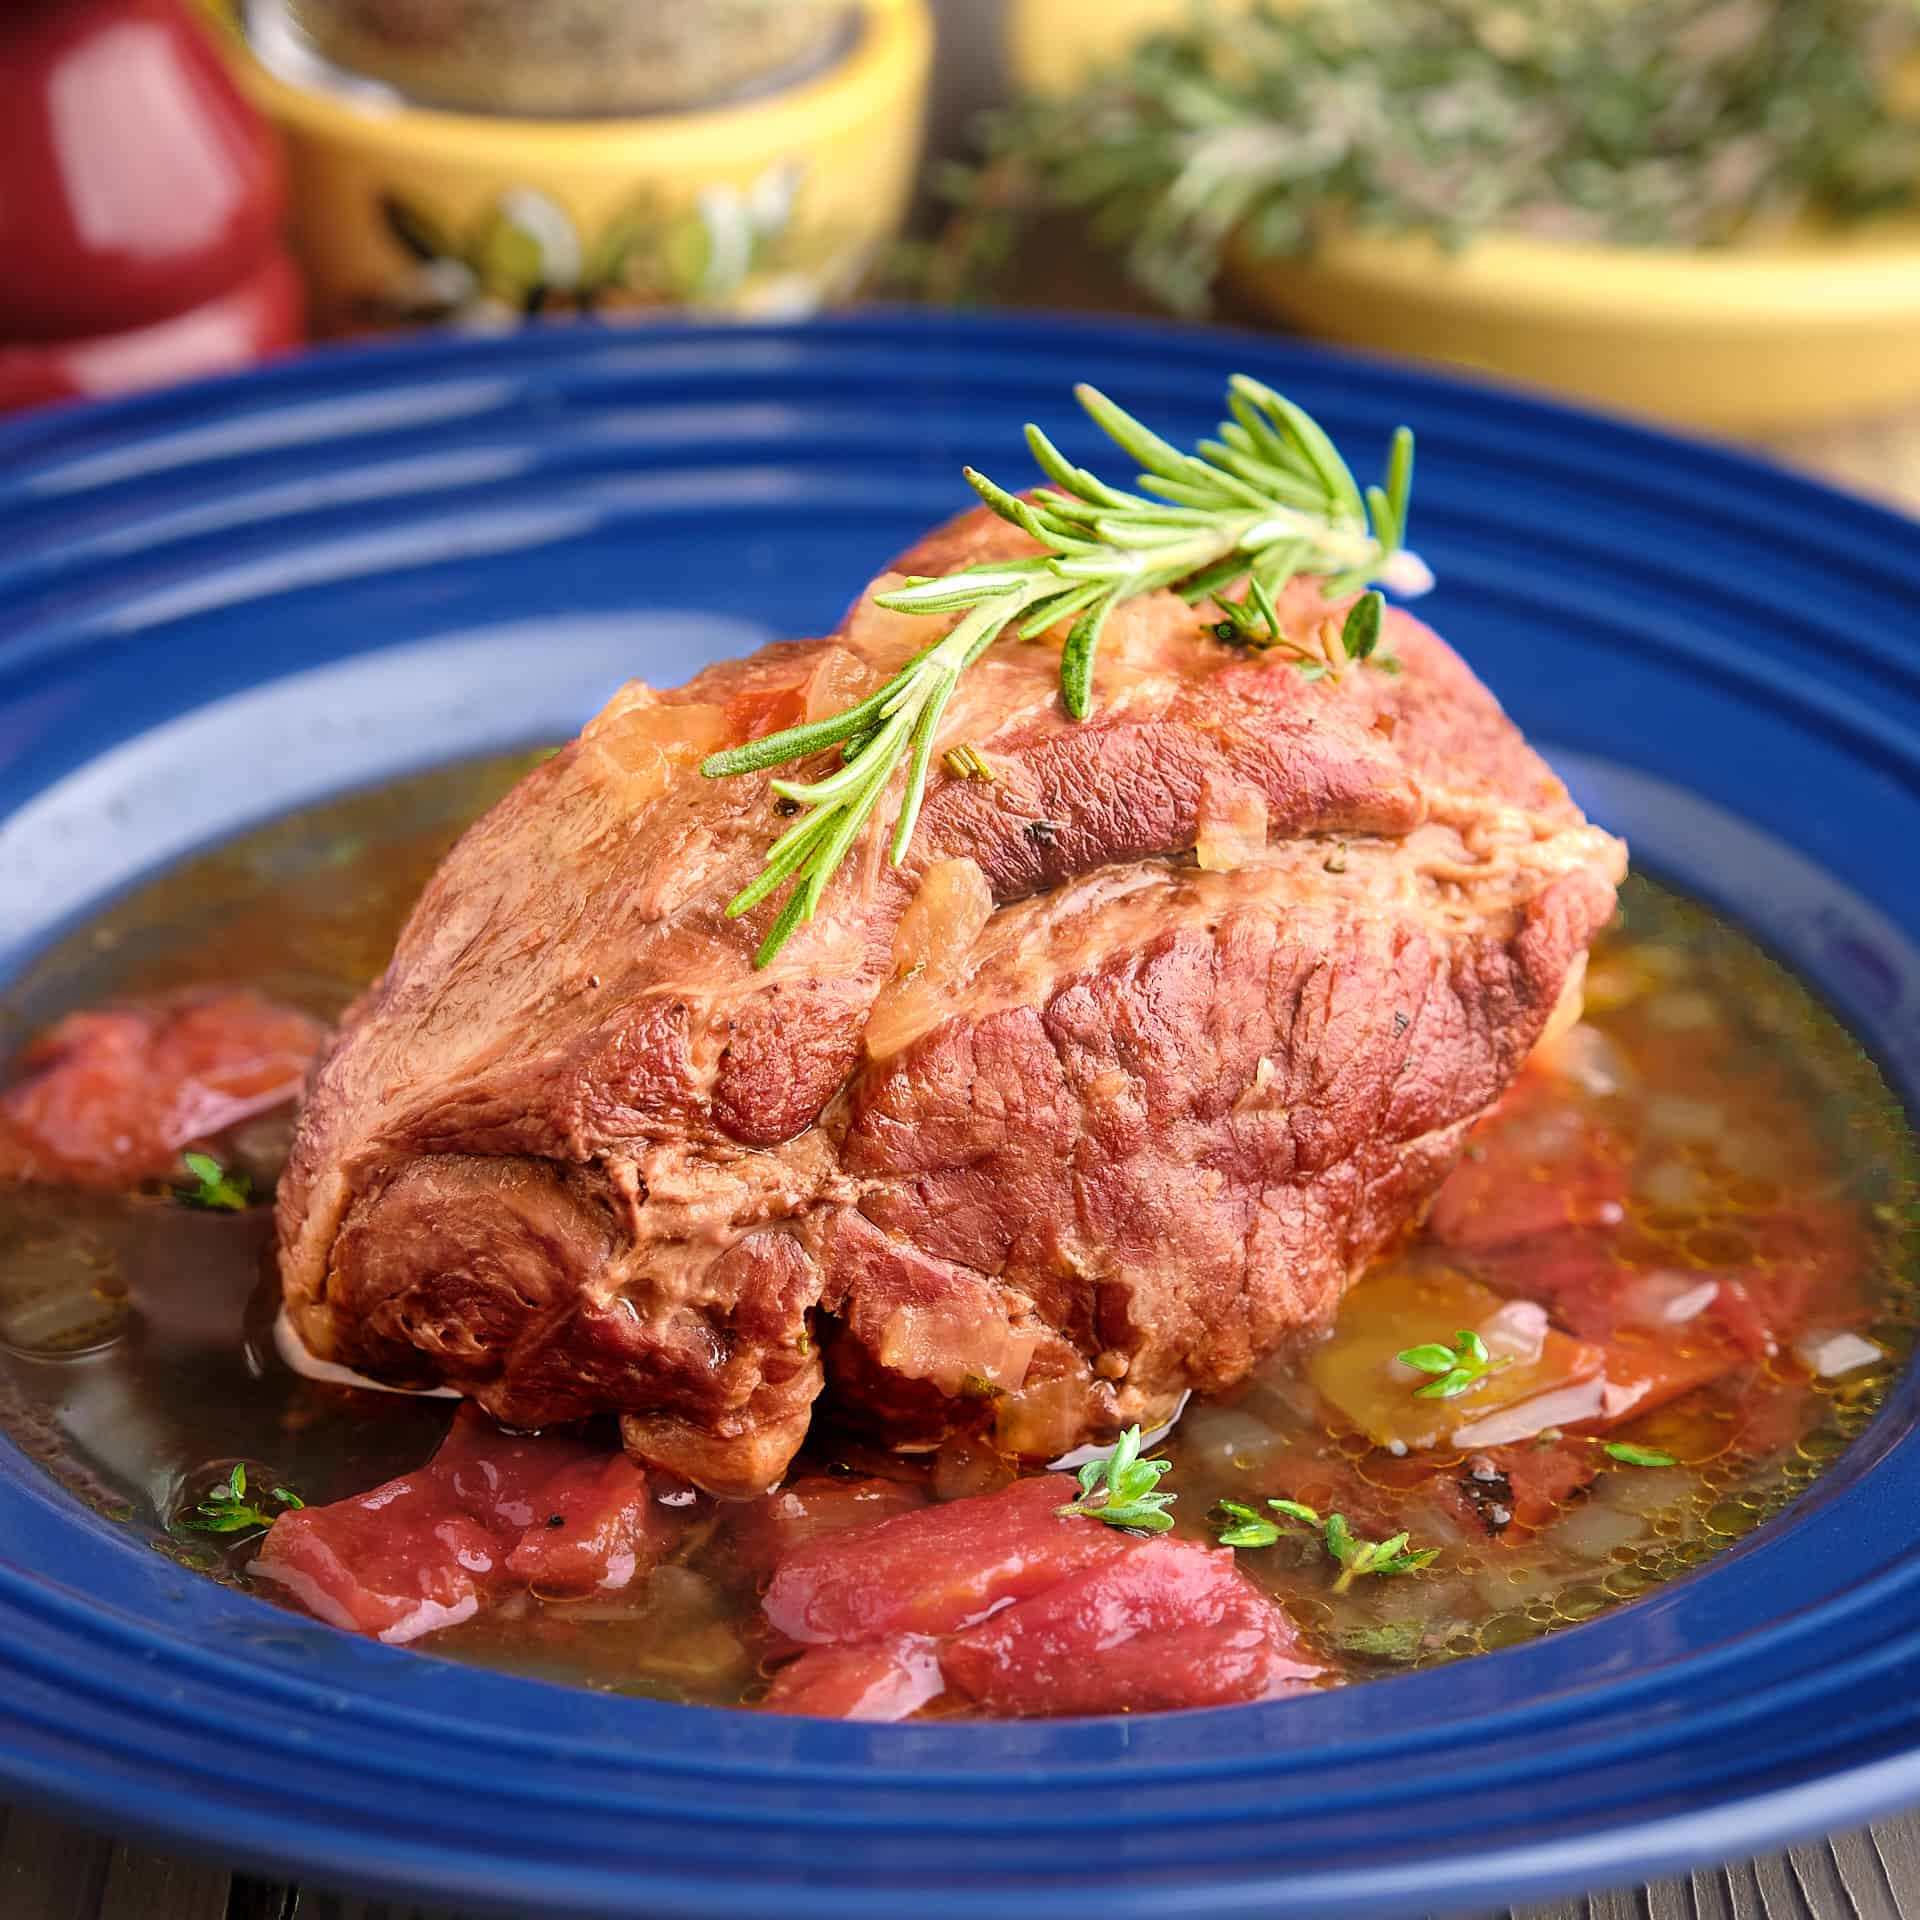 A piece of boneless leg of lamb, in sauce, with a sprig of rosemary on top